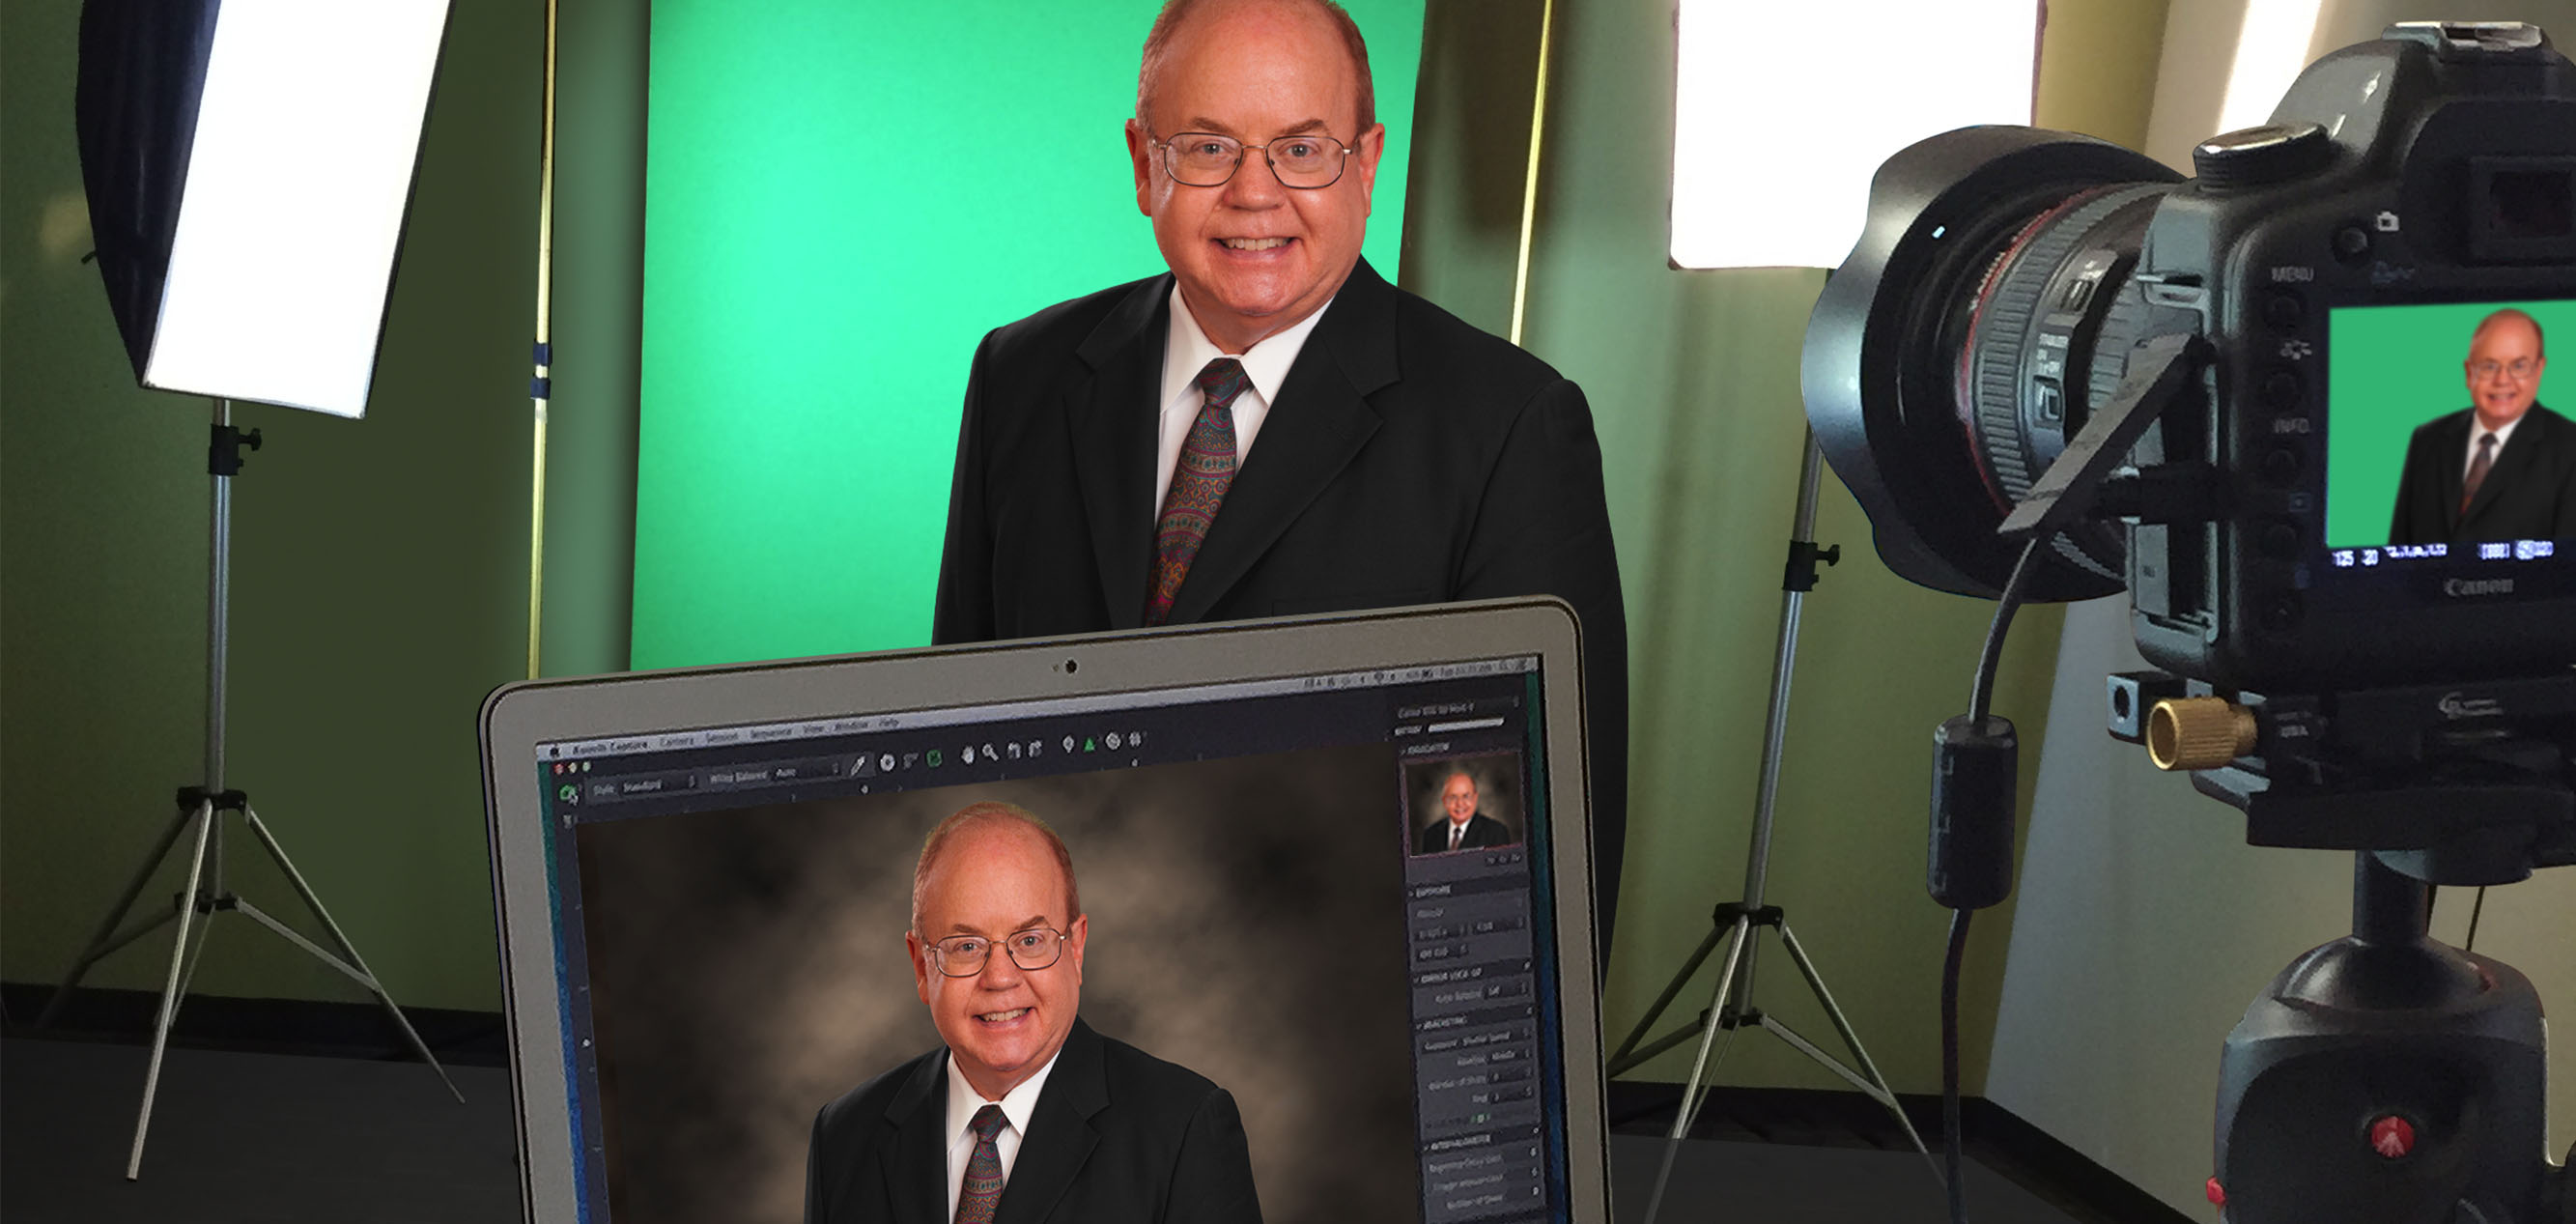 business portraits of senior management personnel for a company website